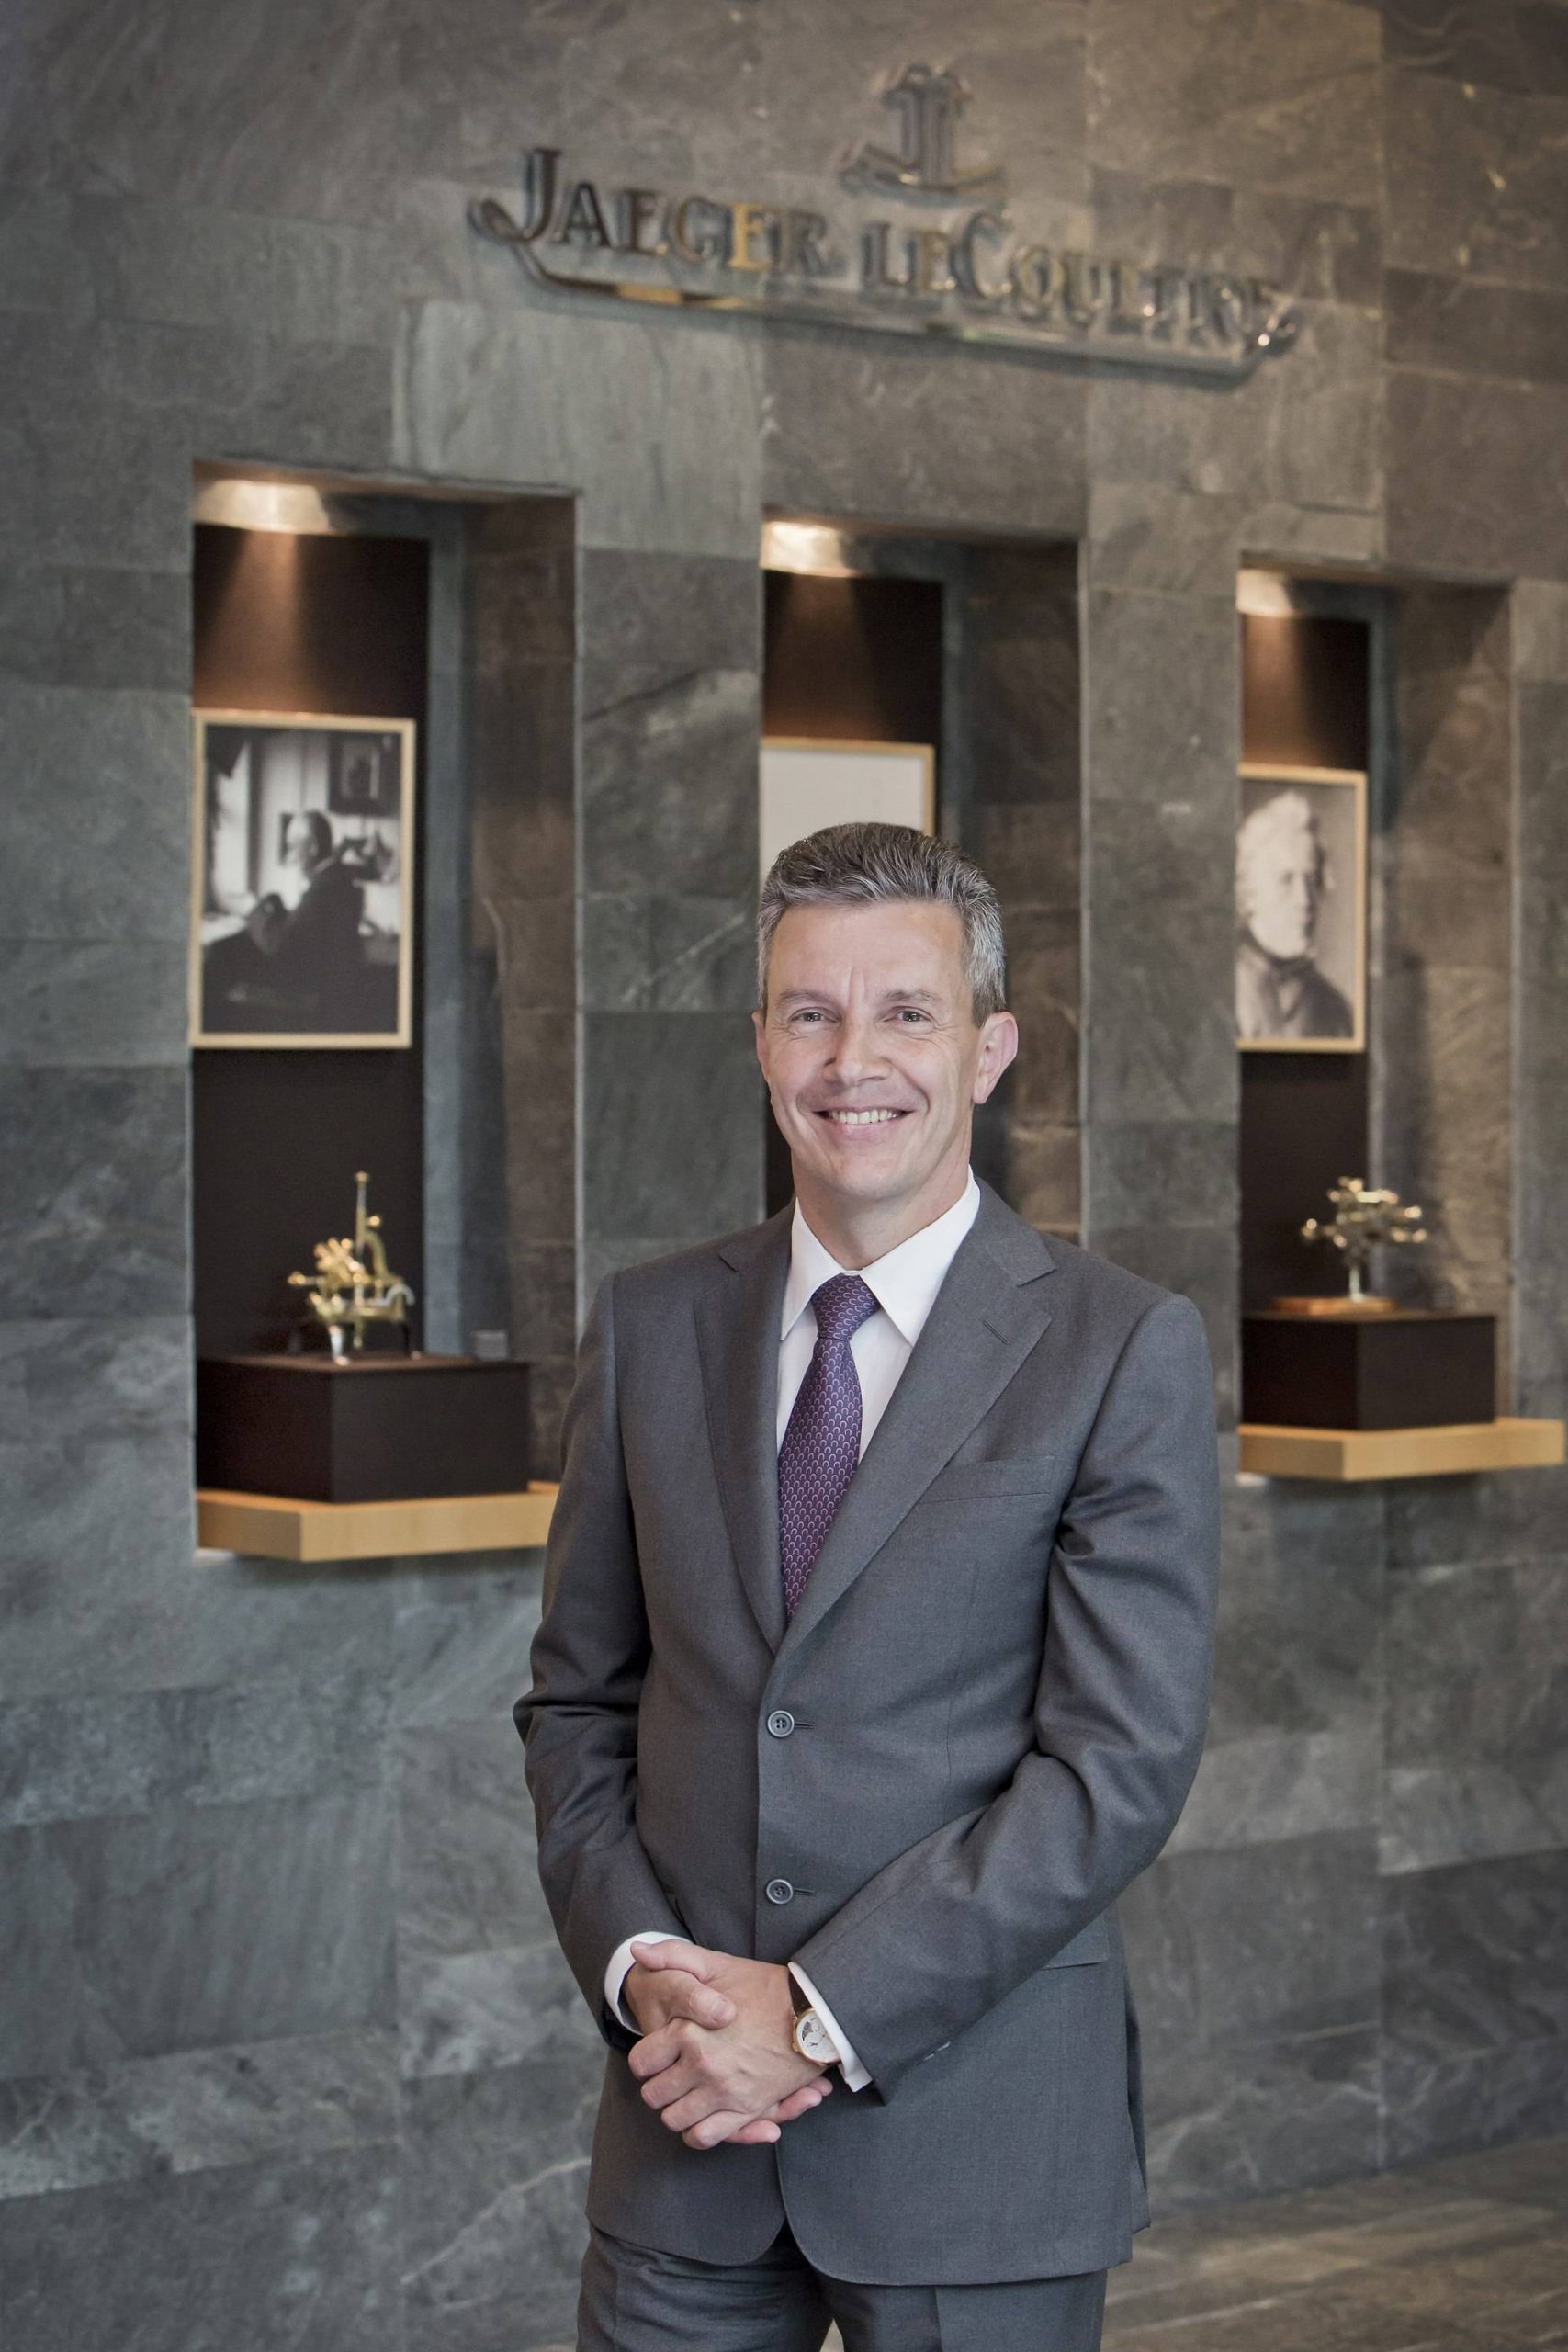 Jaeger-LeCoultre Appoints New CEO Daniel Riedo